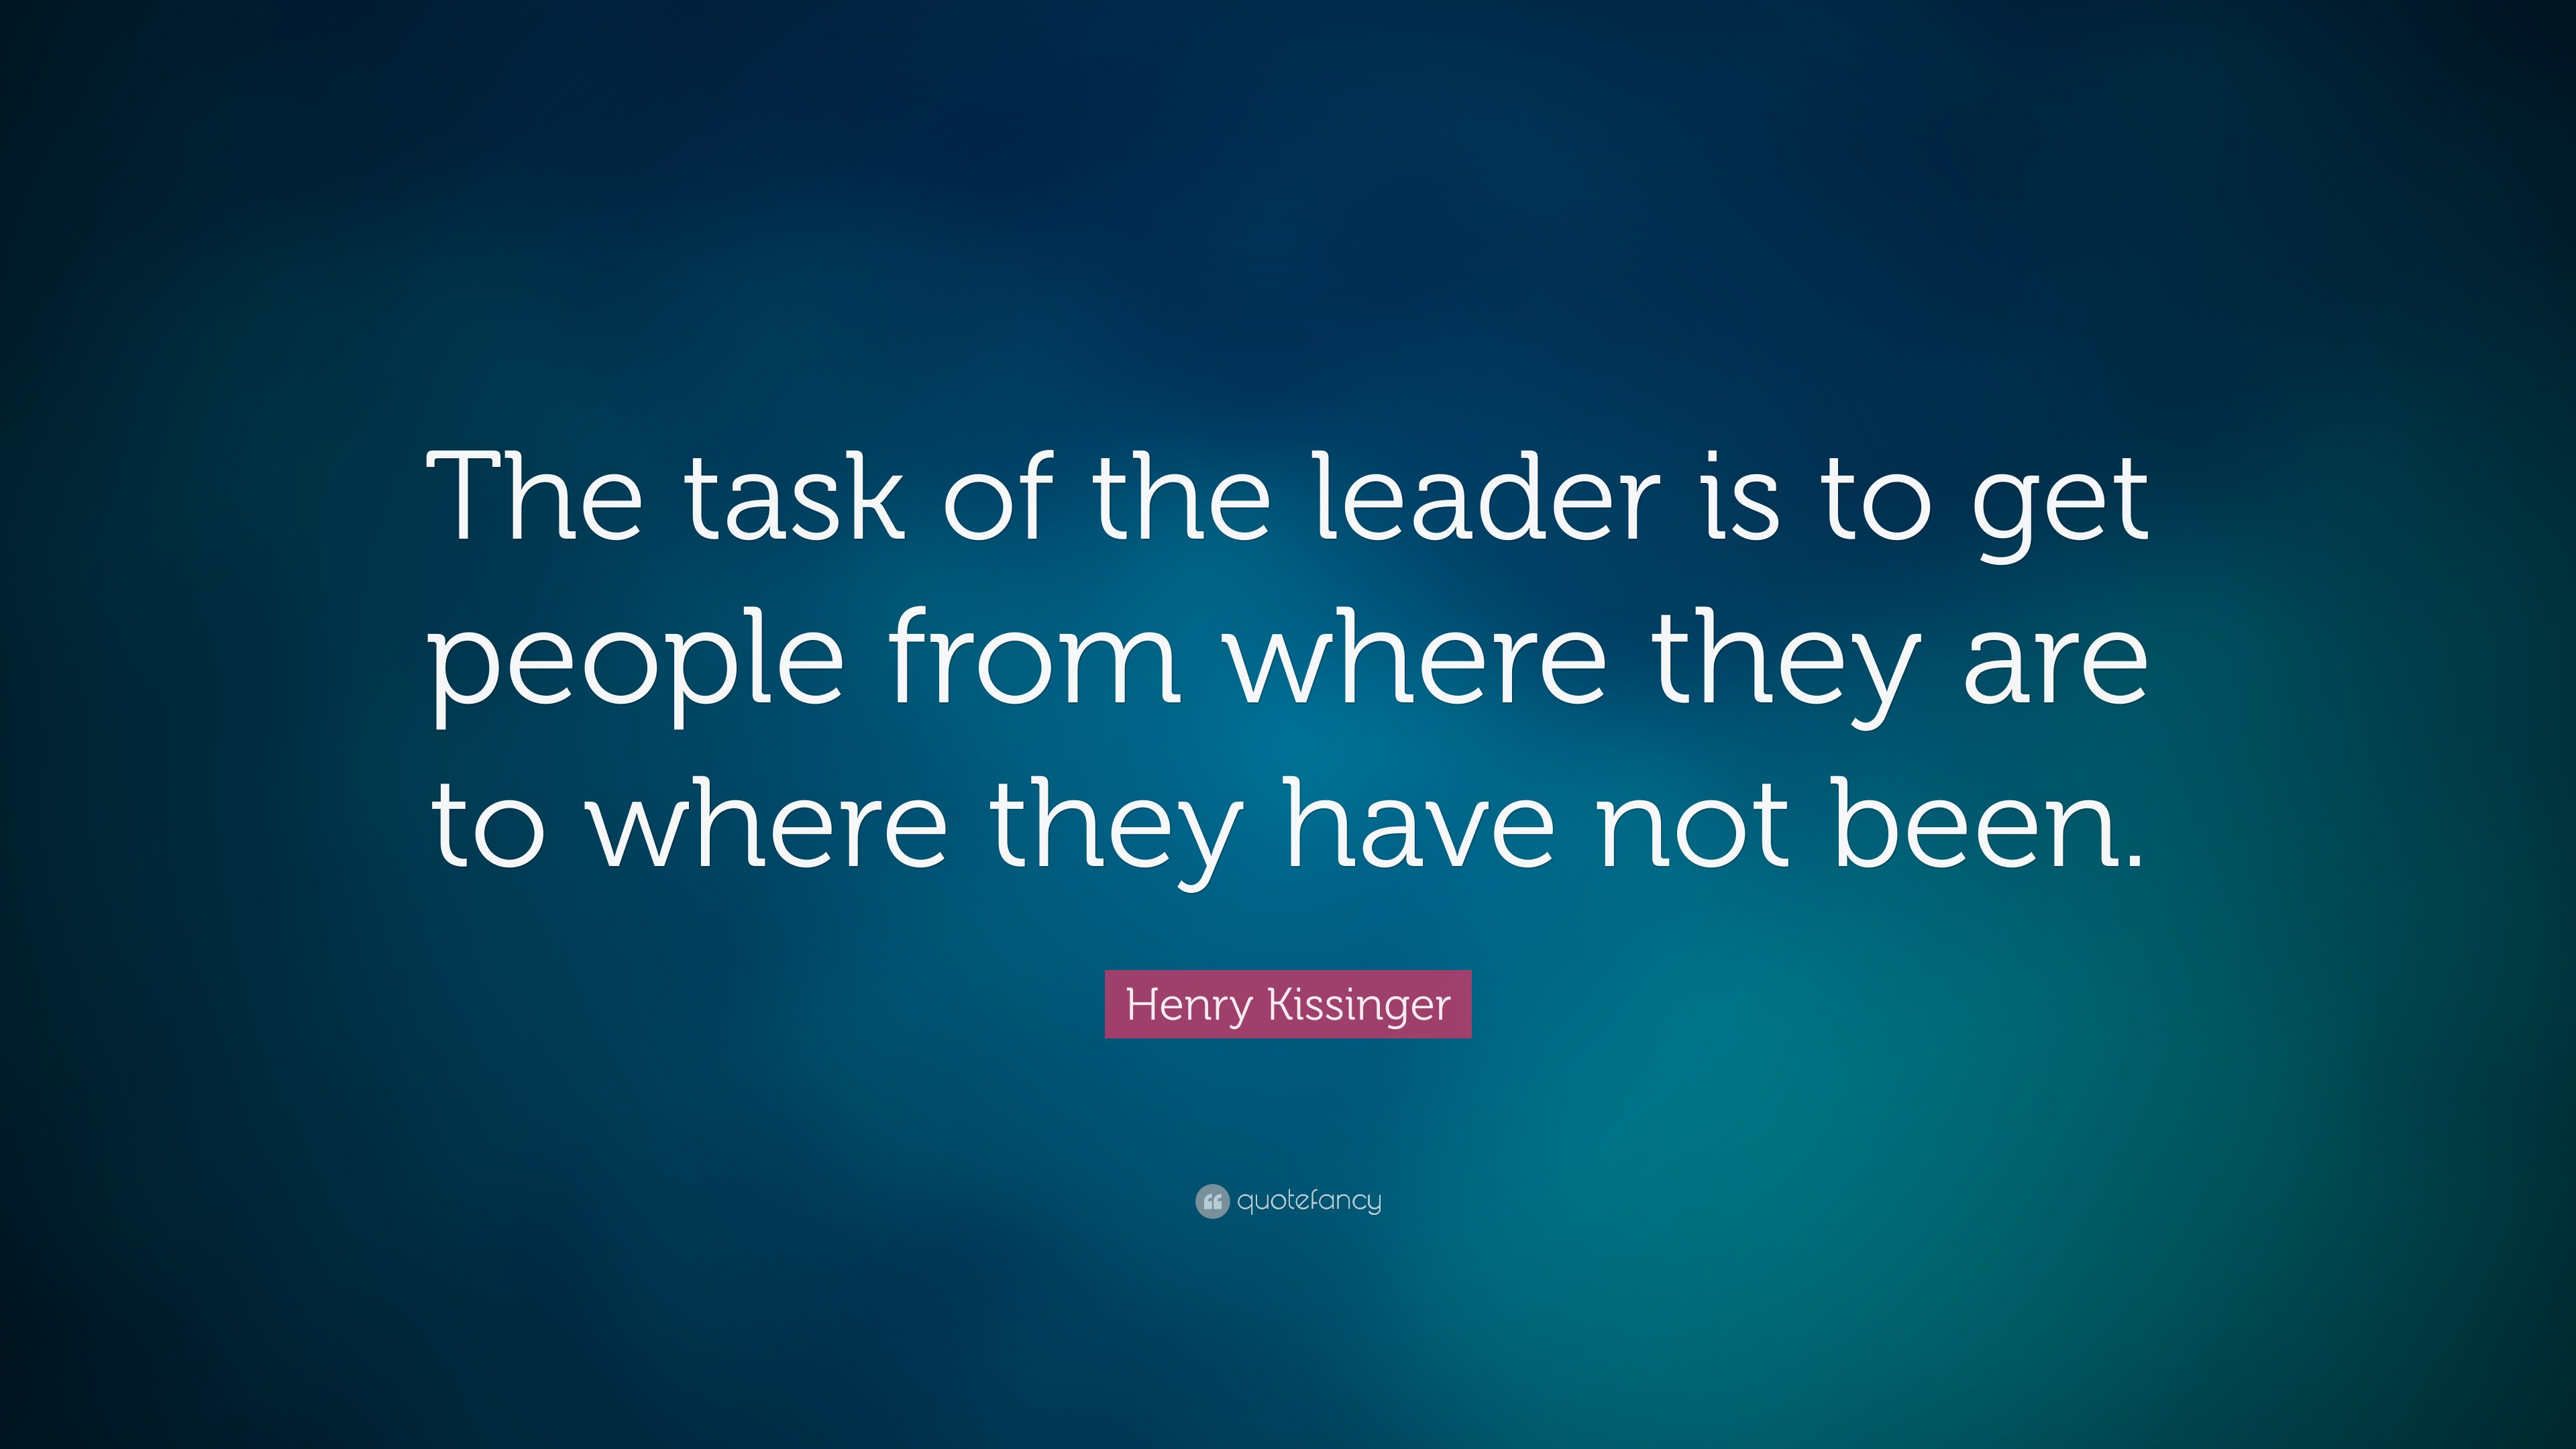 Henry Kissinger Quote: “The task of the leader is to get people from